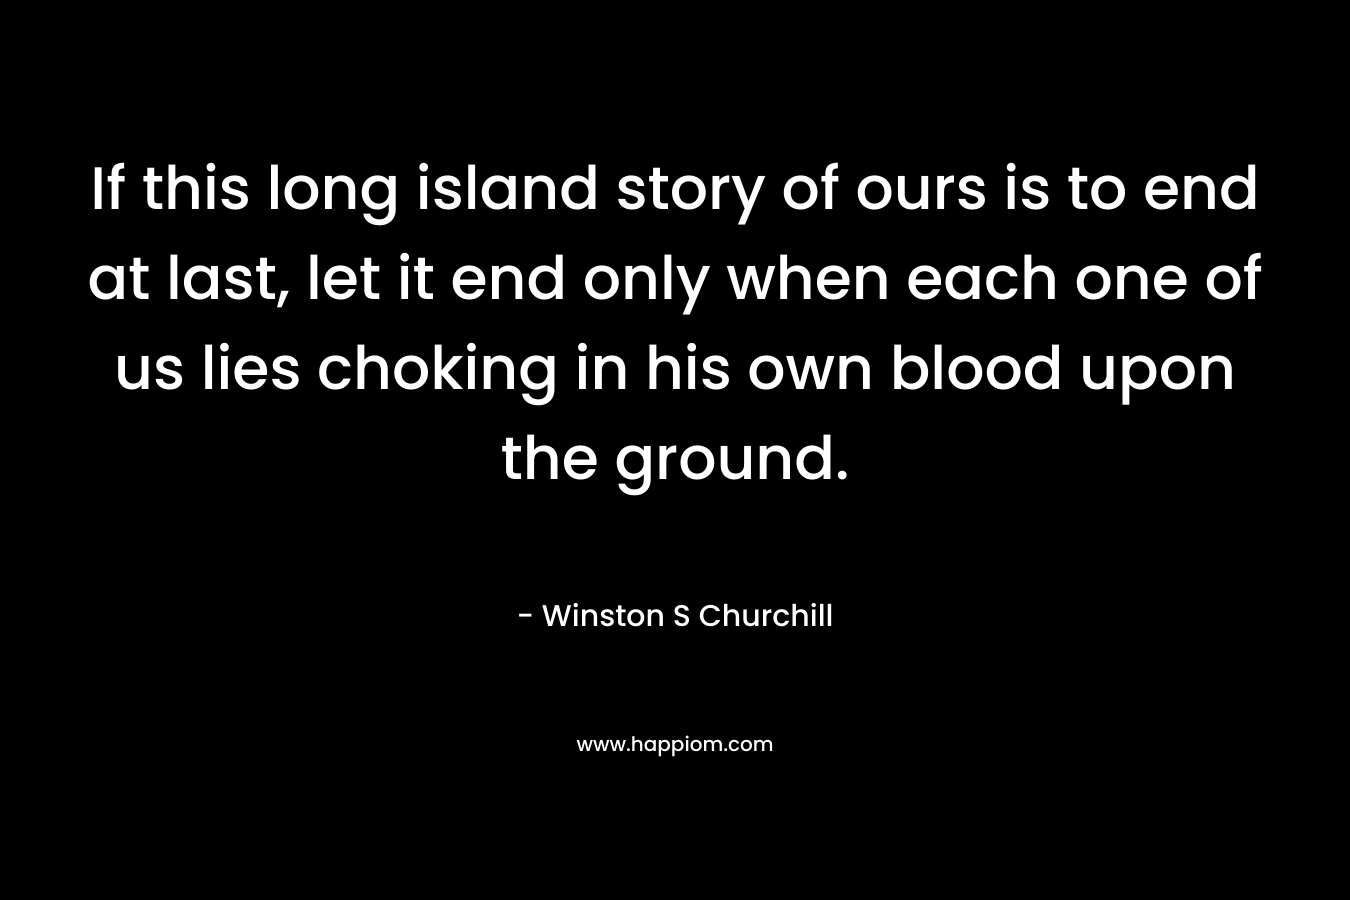 If this long island story of ours is to end at last, let it end only when each one of us lies choking in his own blood upon the ground.